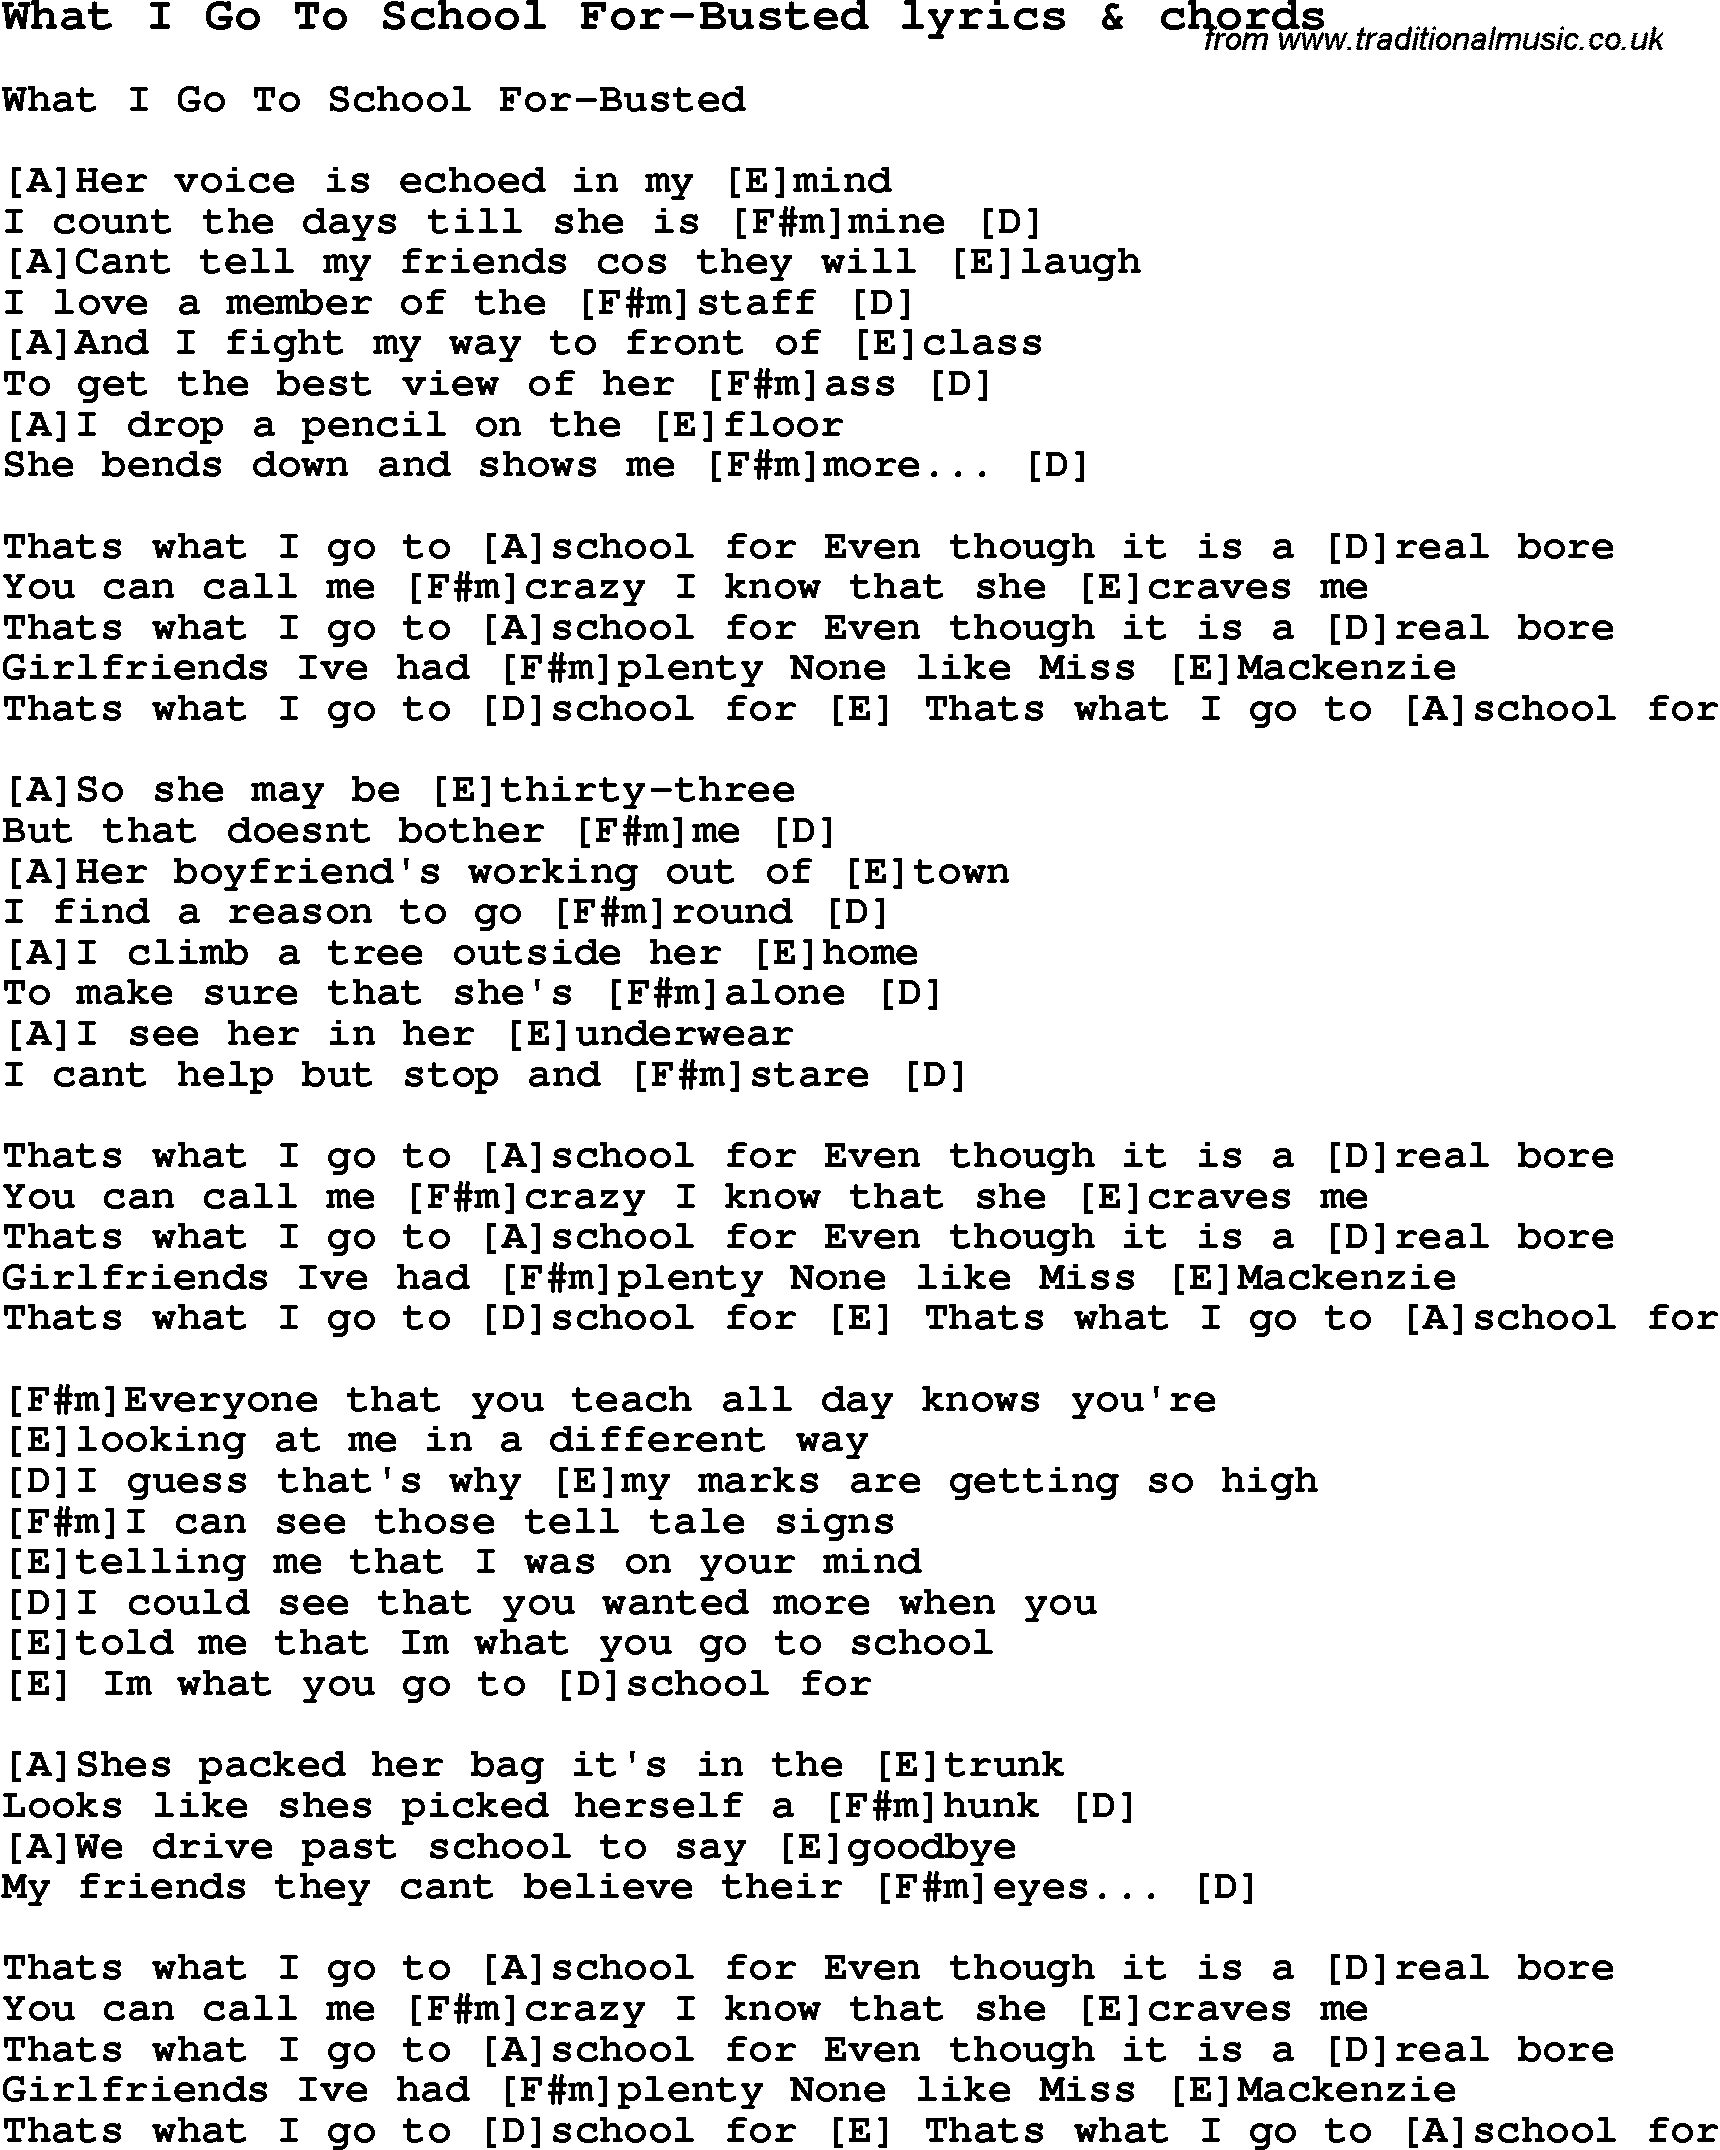 Love Song Lyrics for: What I Go To School For-Busted with chords for Ukulele, Guitar Banjo etc.